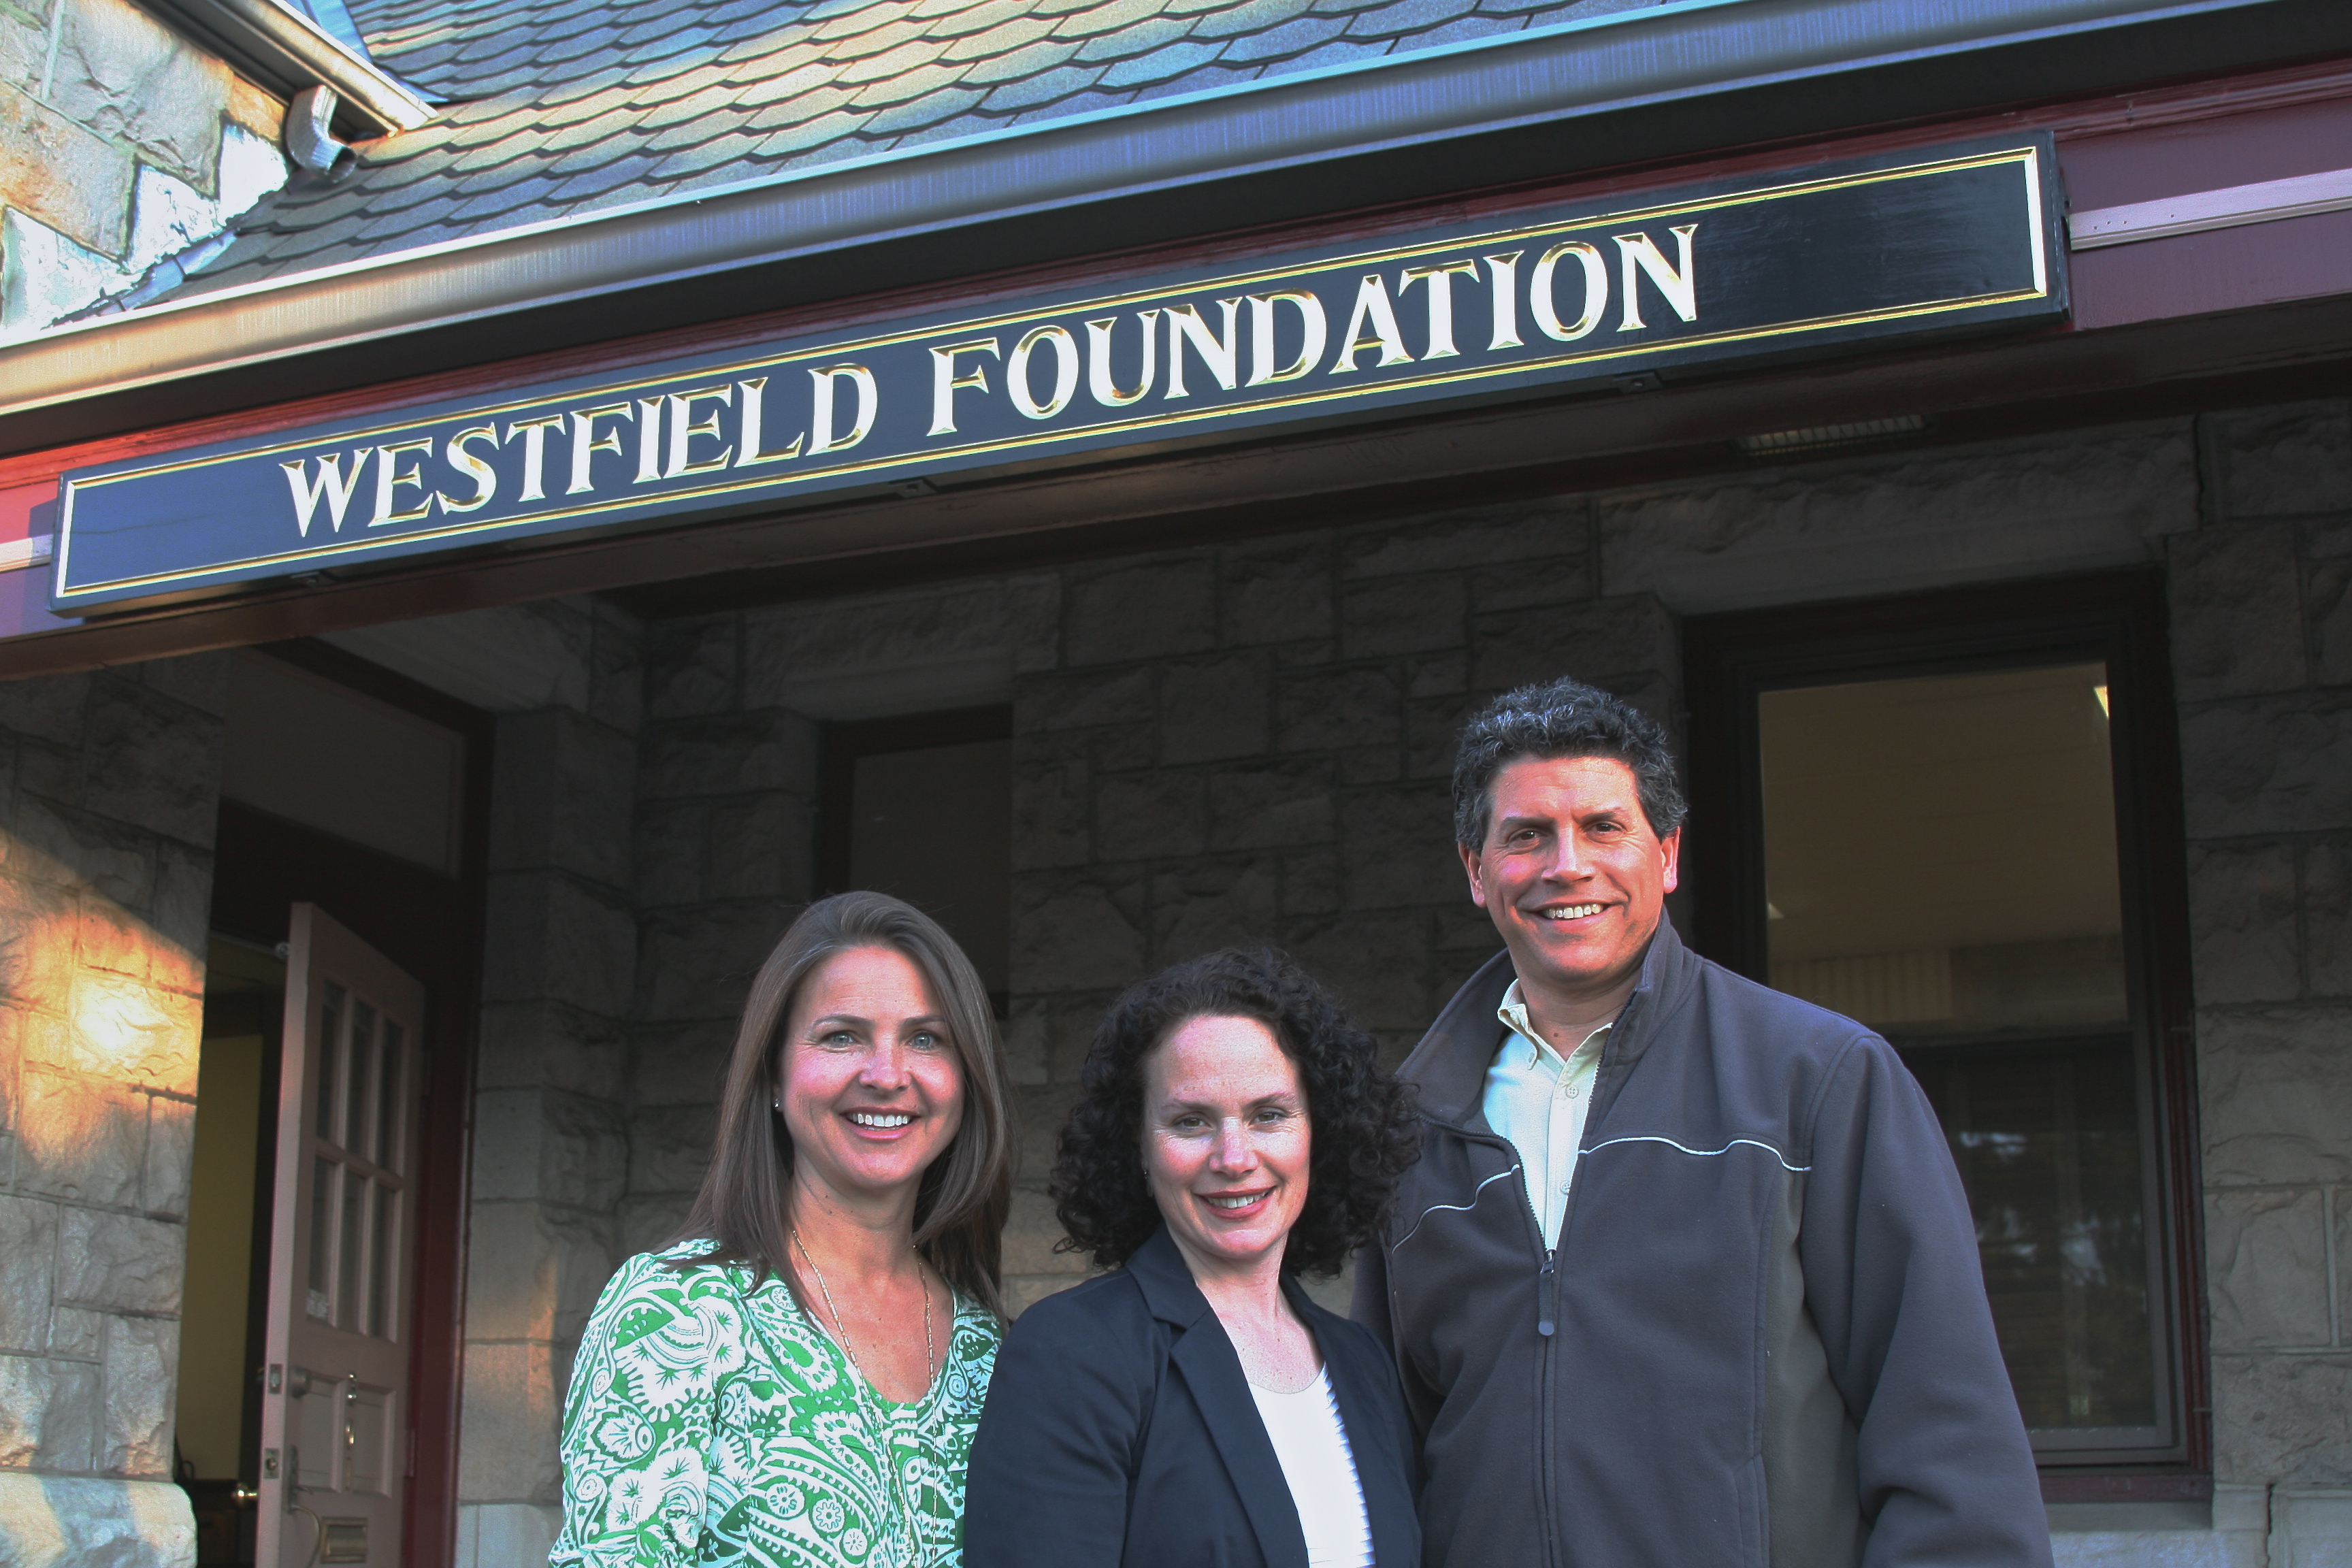 The Westfield Foundation welcomes three new trustees to  the Foundation board.  Pictured (l to r): Janet Sarkos, Karen Fountain and Mitch Beinhaker.